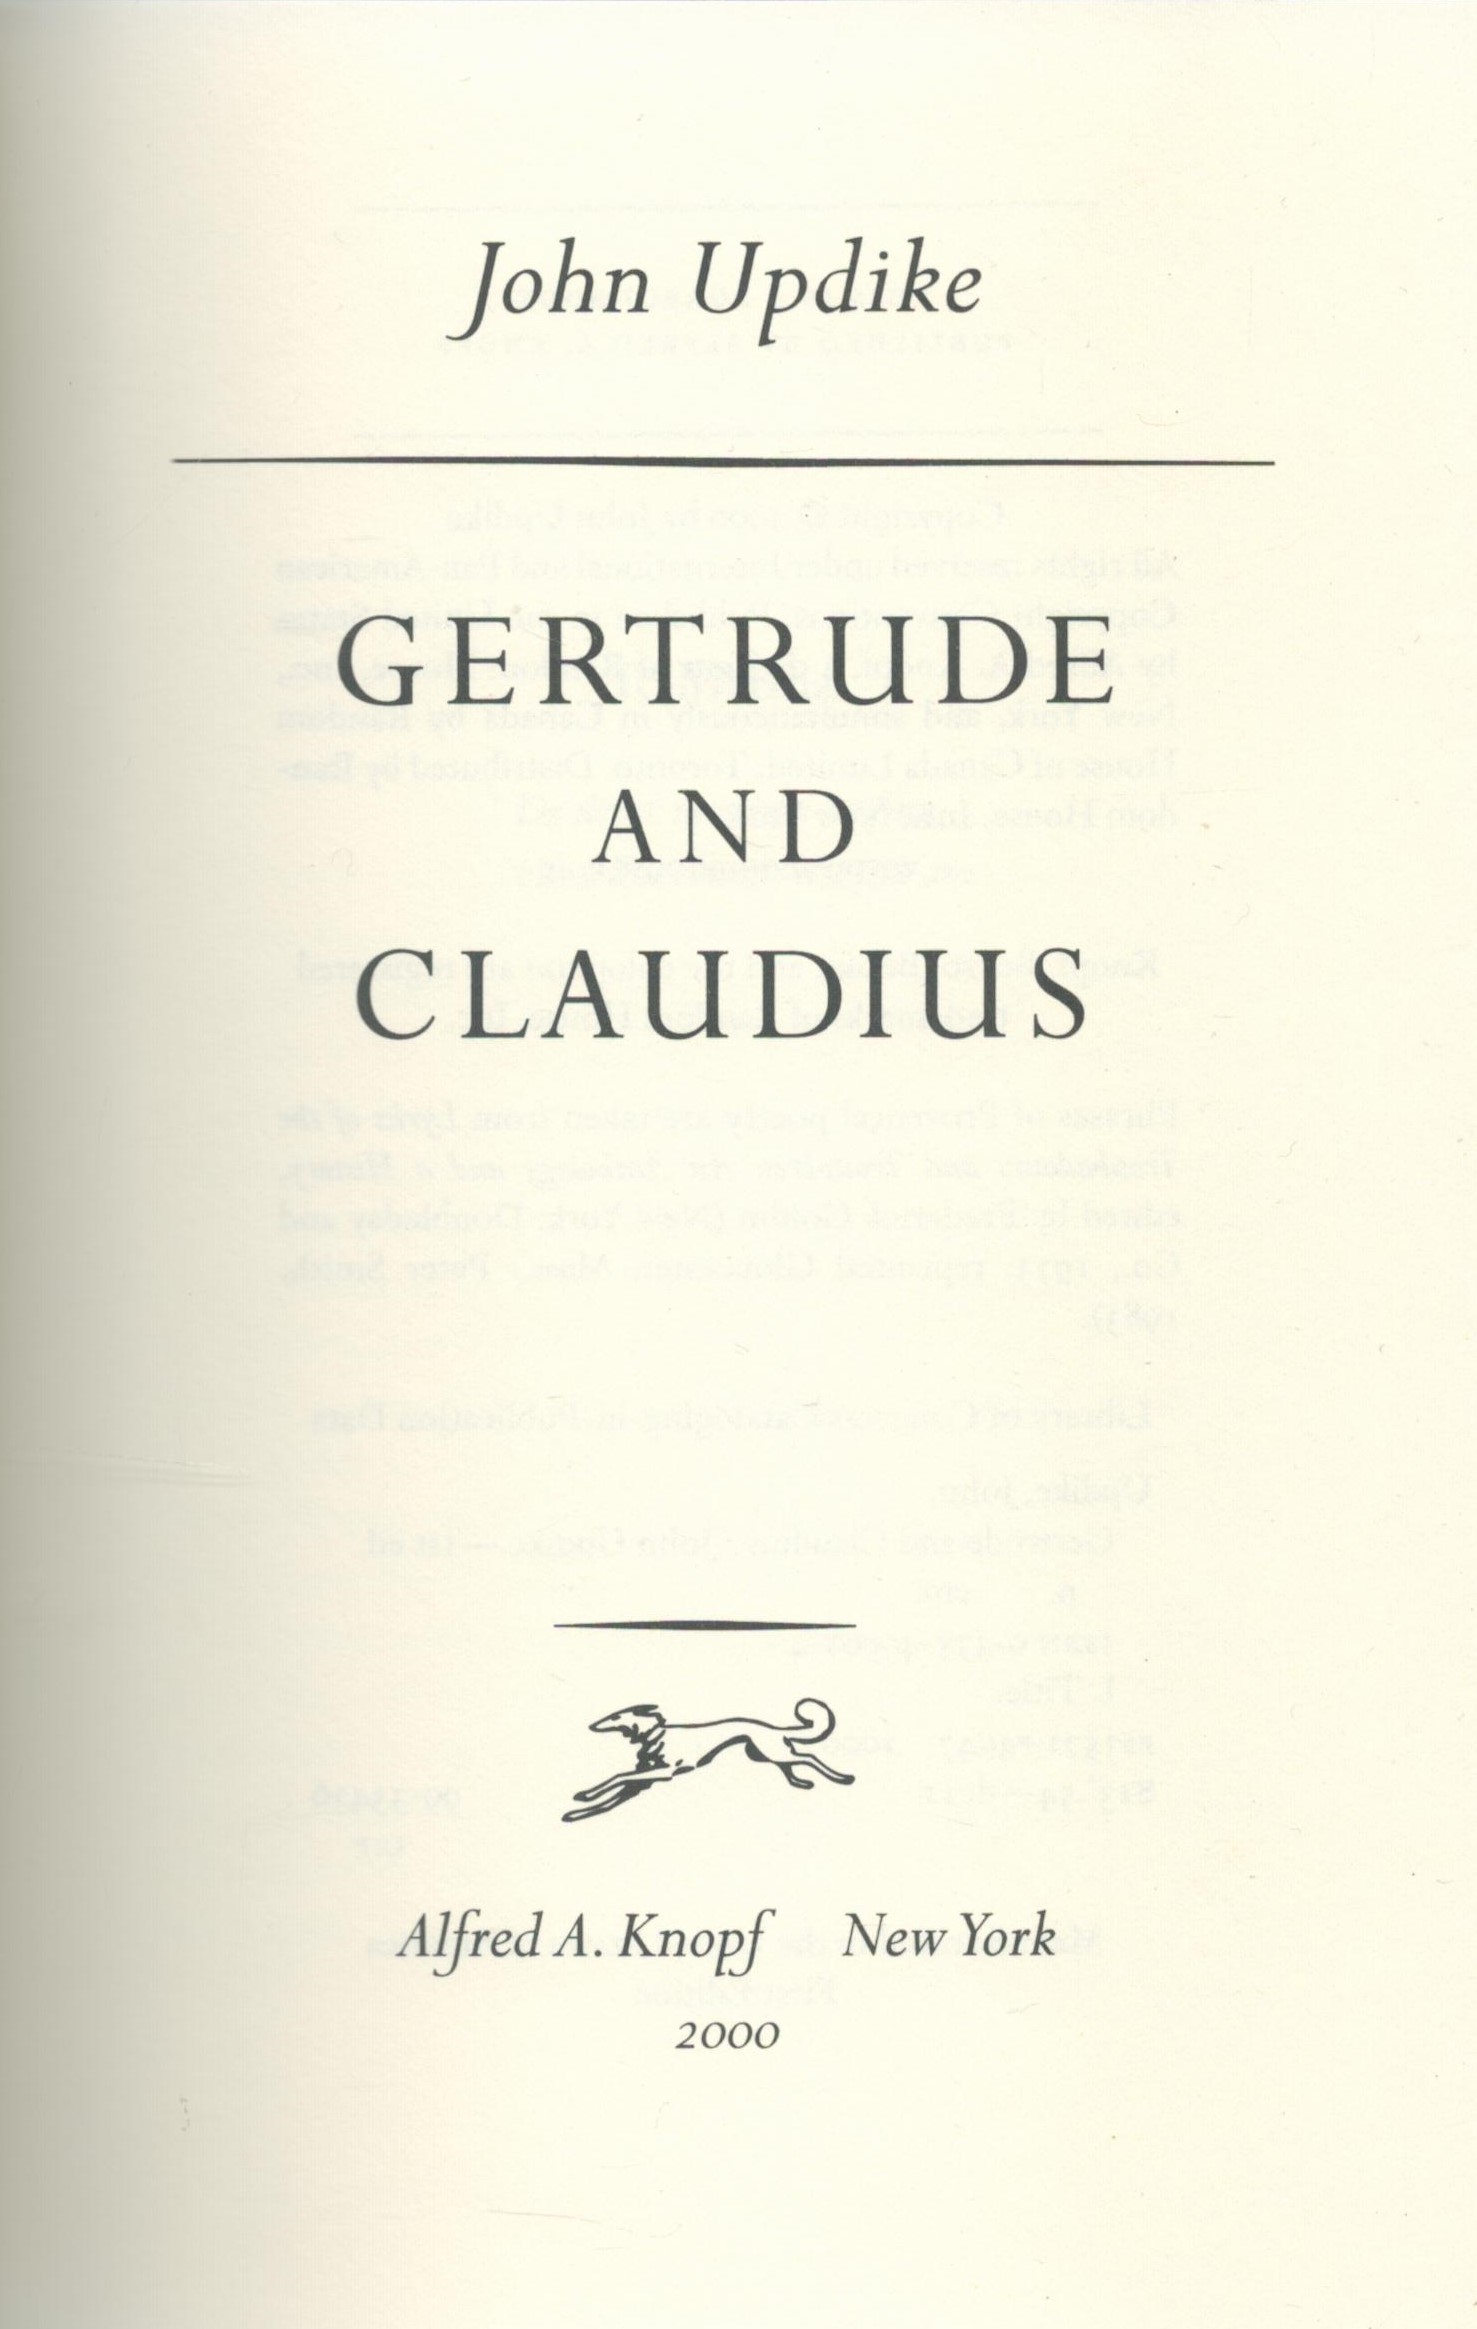 Gertrude and Claudius by John Updike 2000 First Edition Hardback Book with 212 pages published by - Image 2 of 3